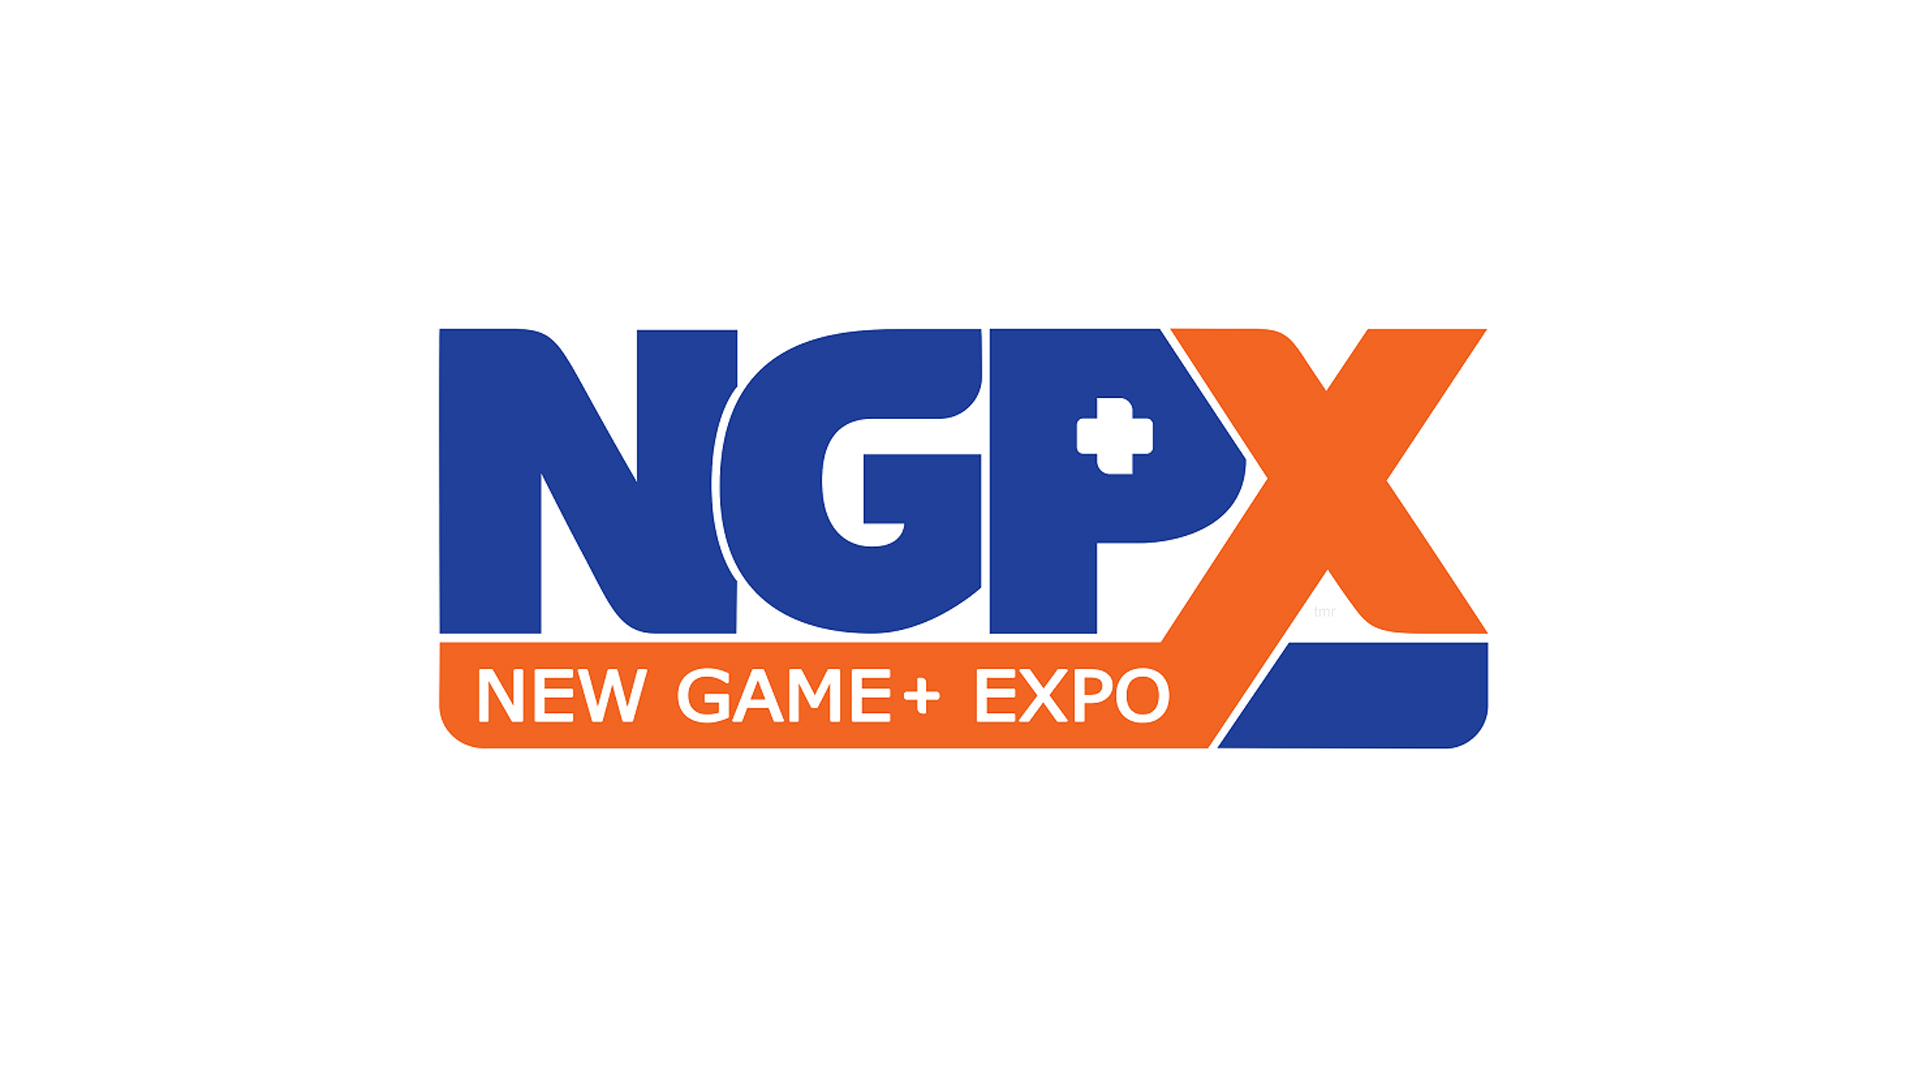 New Game + Expo